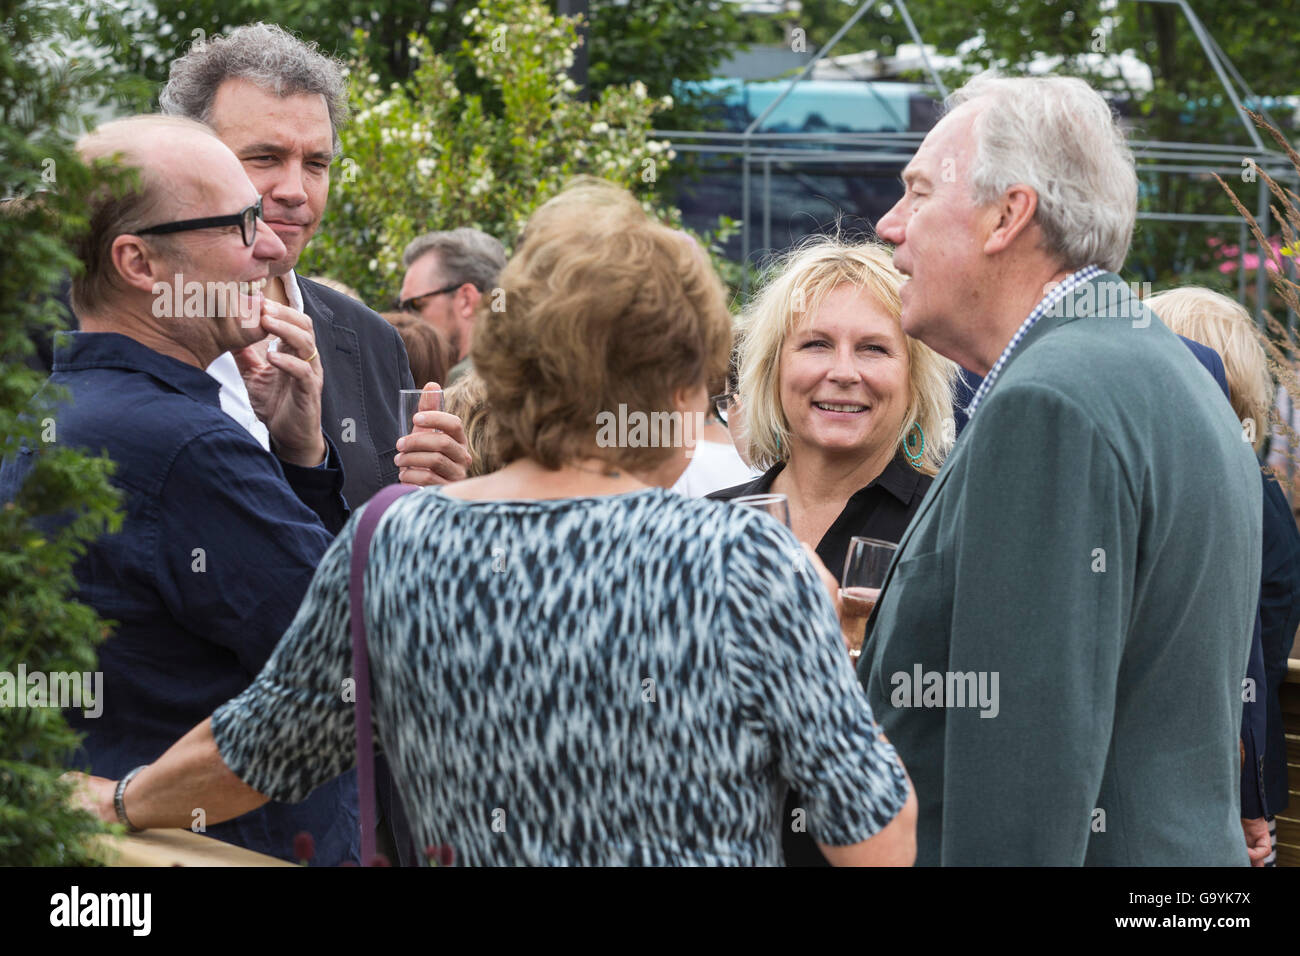 London, UK. 4 July 2016. Adrian Edmondson, Jennifer Saunders and Peter Scissons. Press day at the RHS Hampton Court Flower Show. The show is open to the public from 5 to 10 July 2016. Credit:  Vibrant Pictures/Alamy Live News Stock Photo